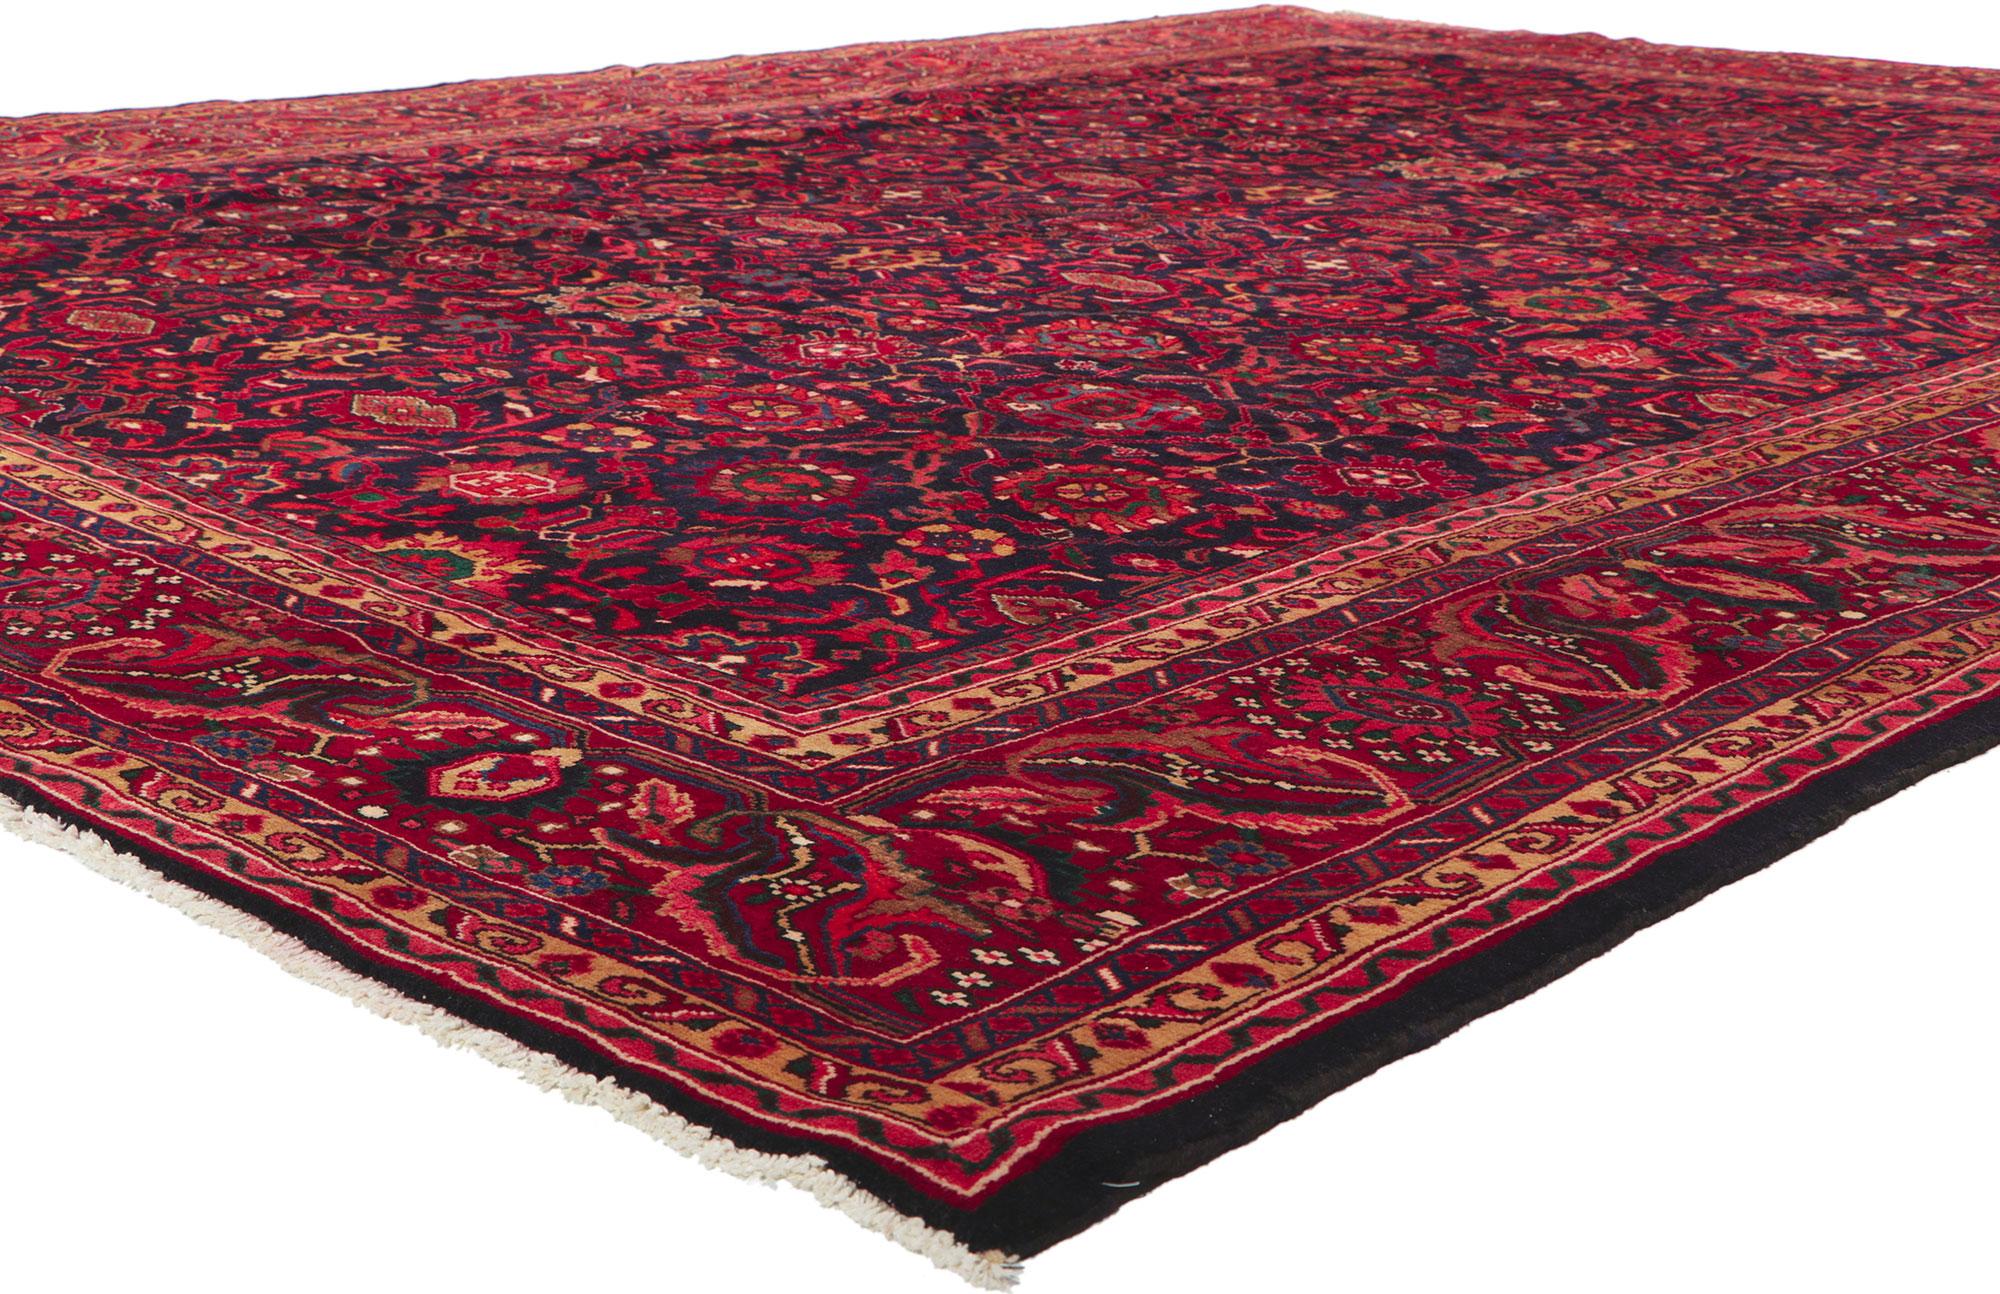 61101 Vintage Persian Malayer Rug, 10'01 x 13'06.

Embark on a journey through time and tradition with this meticulously hand-knotted wool masterpiece, a vintage Persian Malayer rug that exudes regal refinement and timeless beauty. Hailing from the